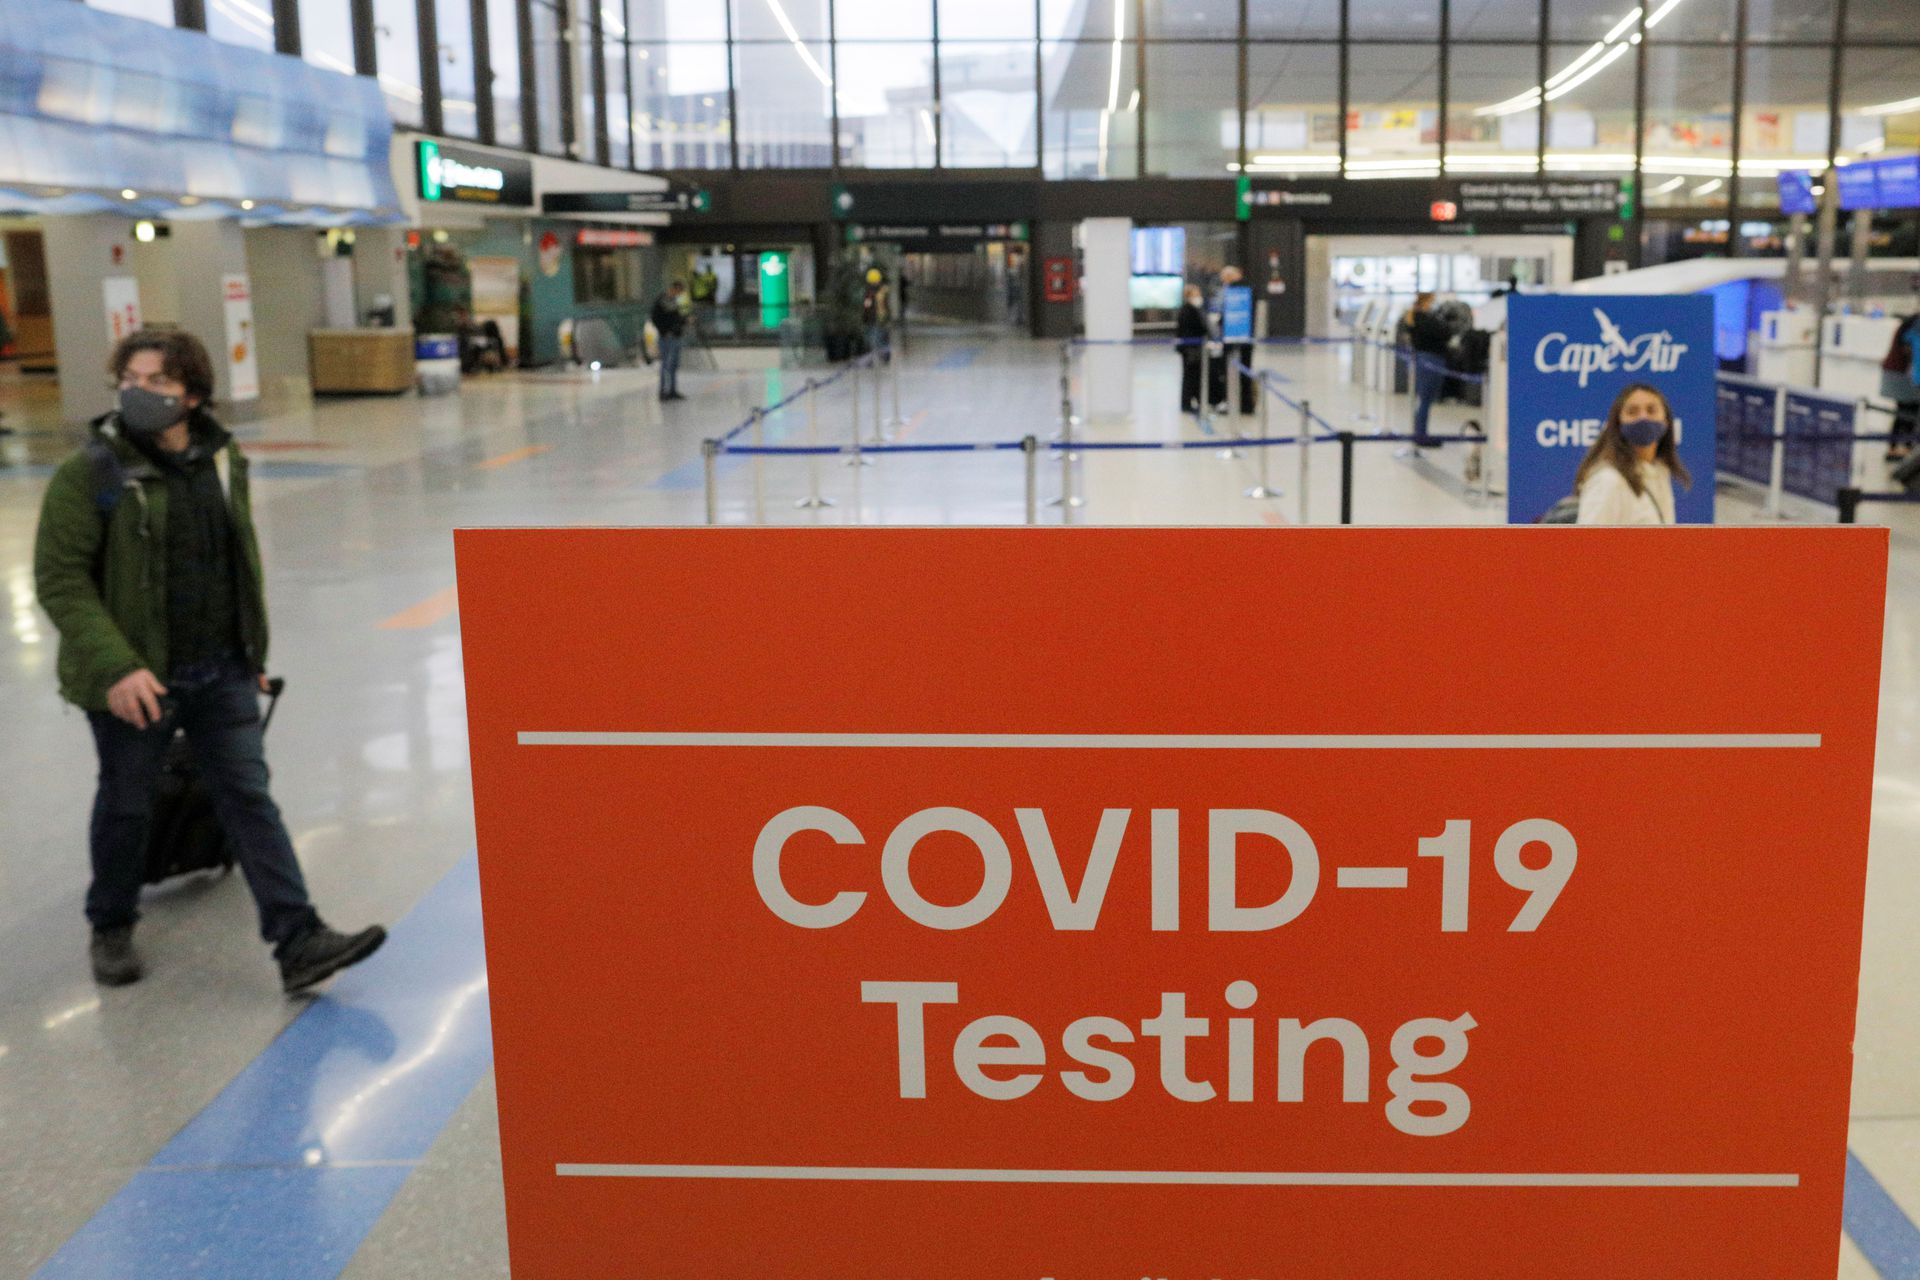 COVID-19 New Travel Rules - Testing Covid Test Mandatory for Passengers Coming from China in Canada and Australia as well